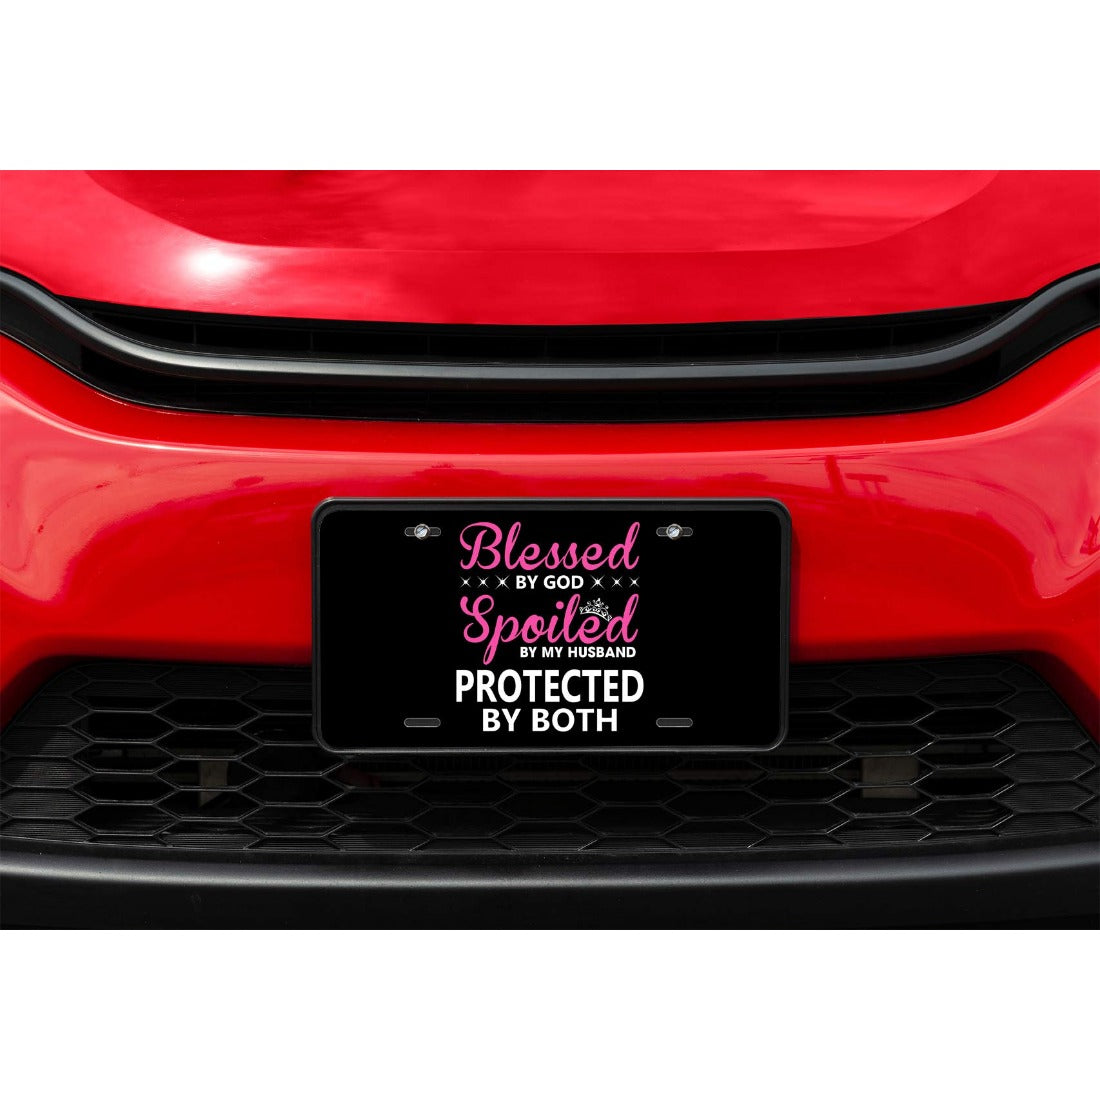 Blessed By God Spoiled By My Husband Protected By Both Christian Front License Plate 6*12in/15*30cm claimedbygoddesigns